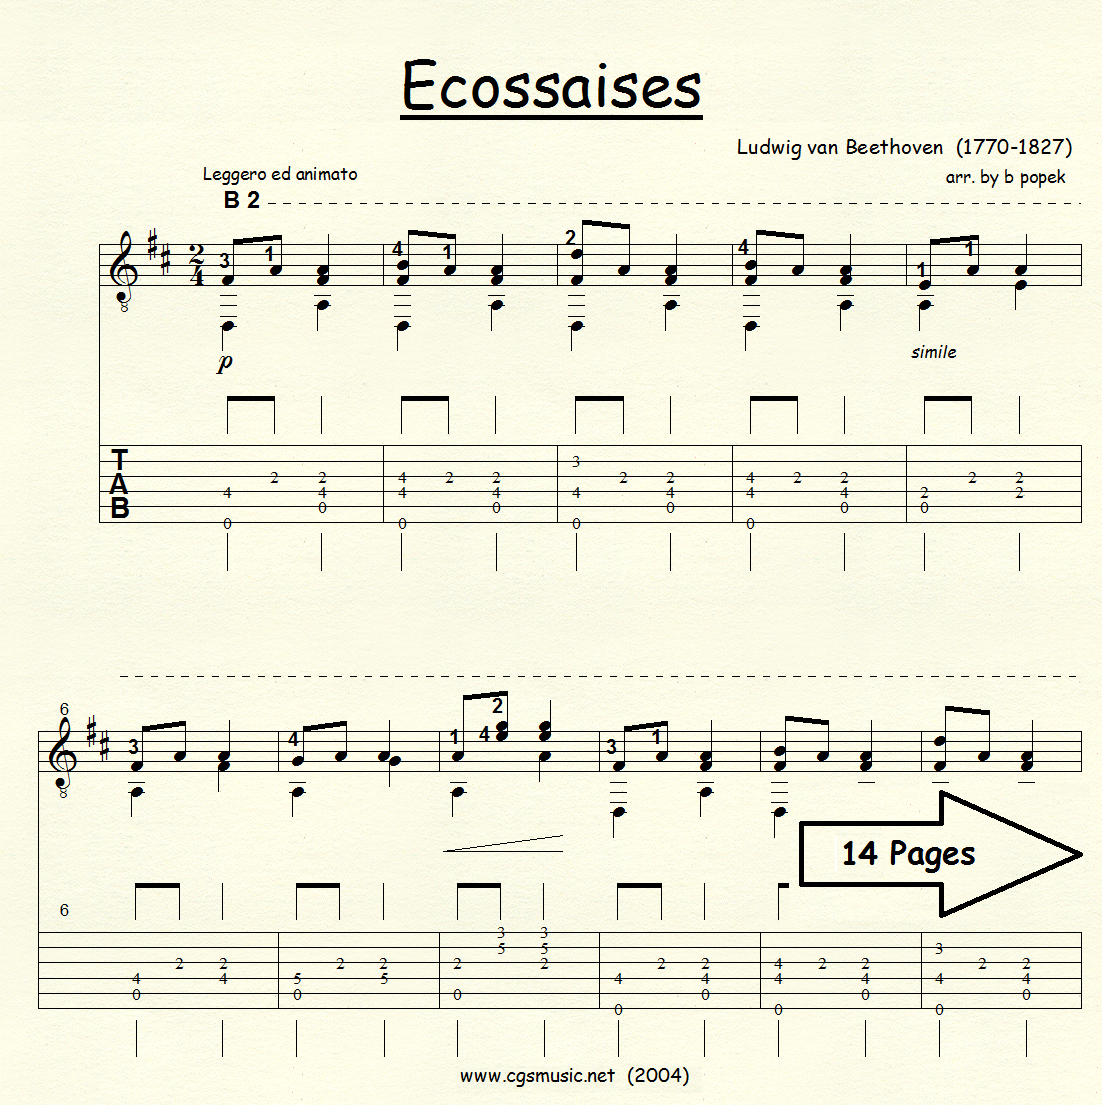 Ecossaises (Beethoven) for Classical Guitar in Tablature